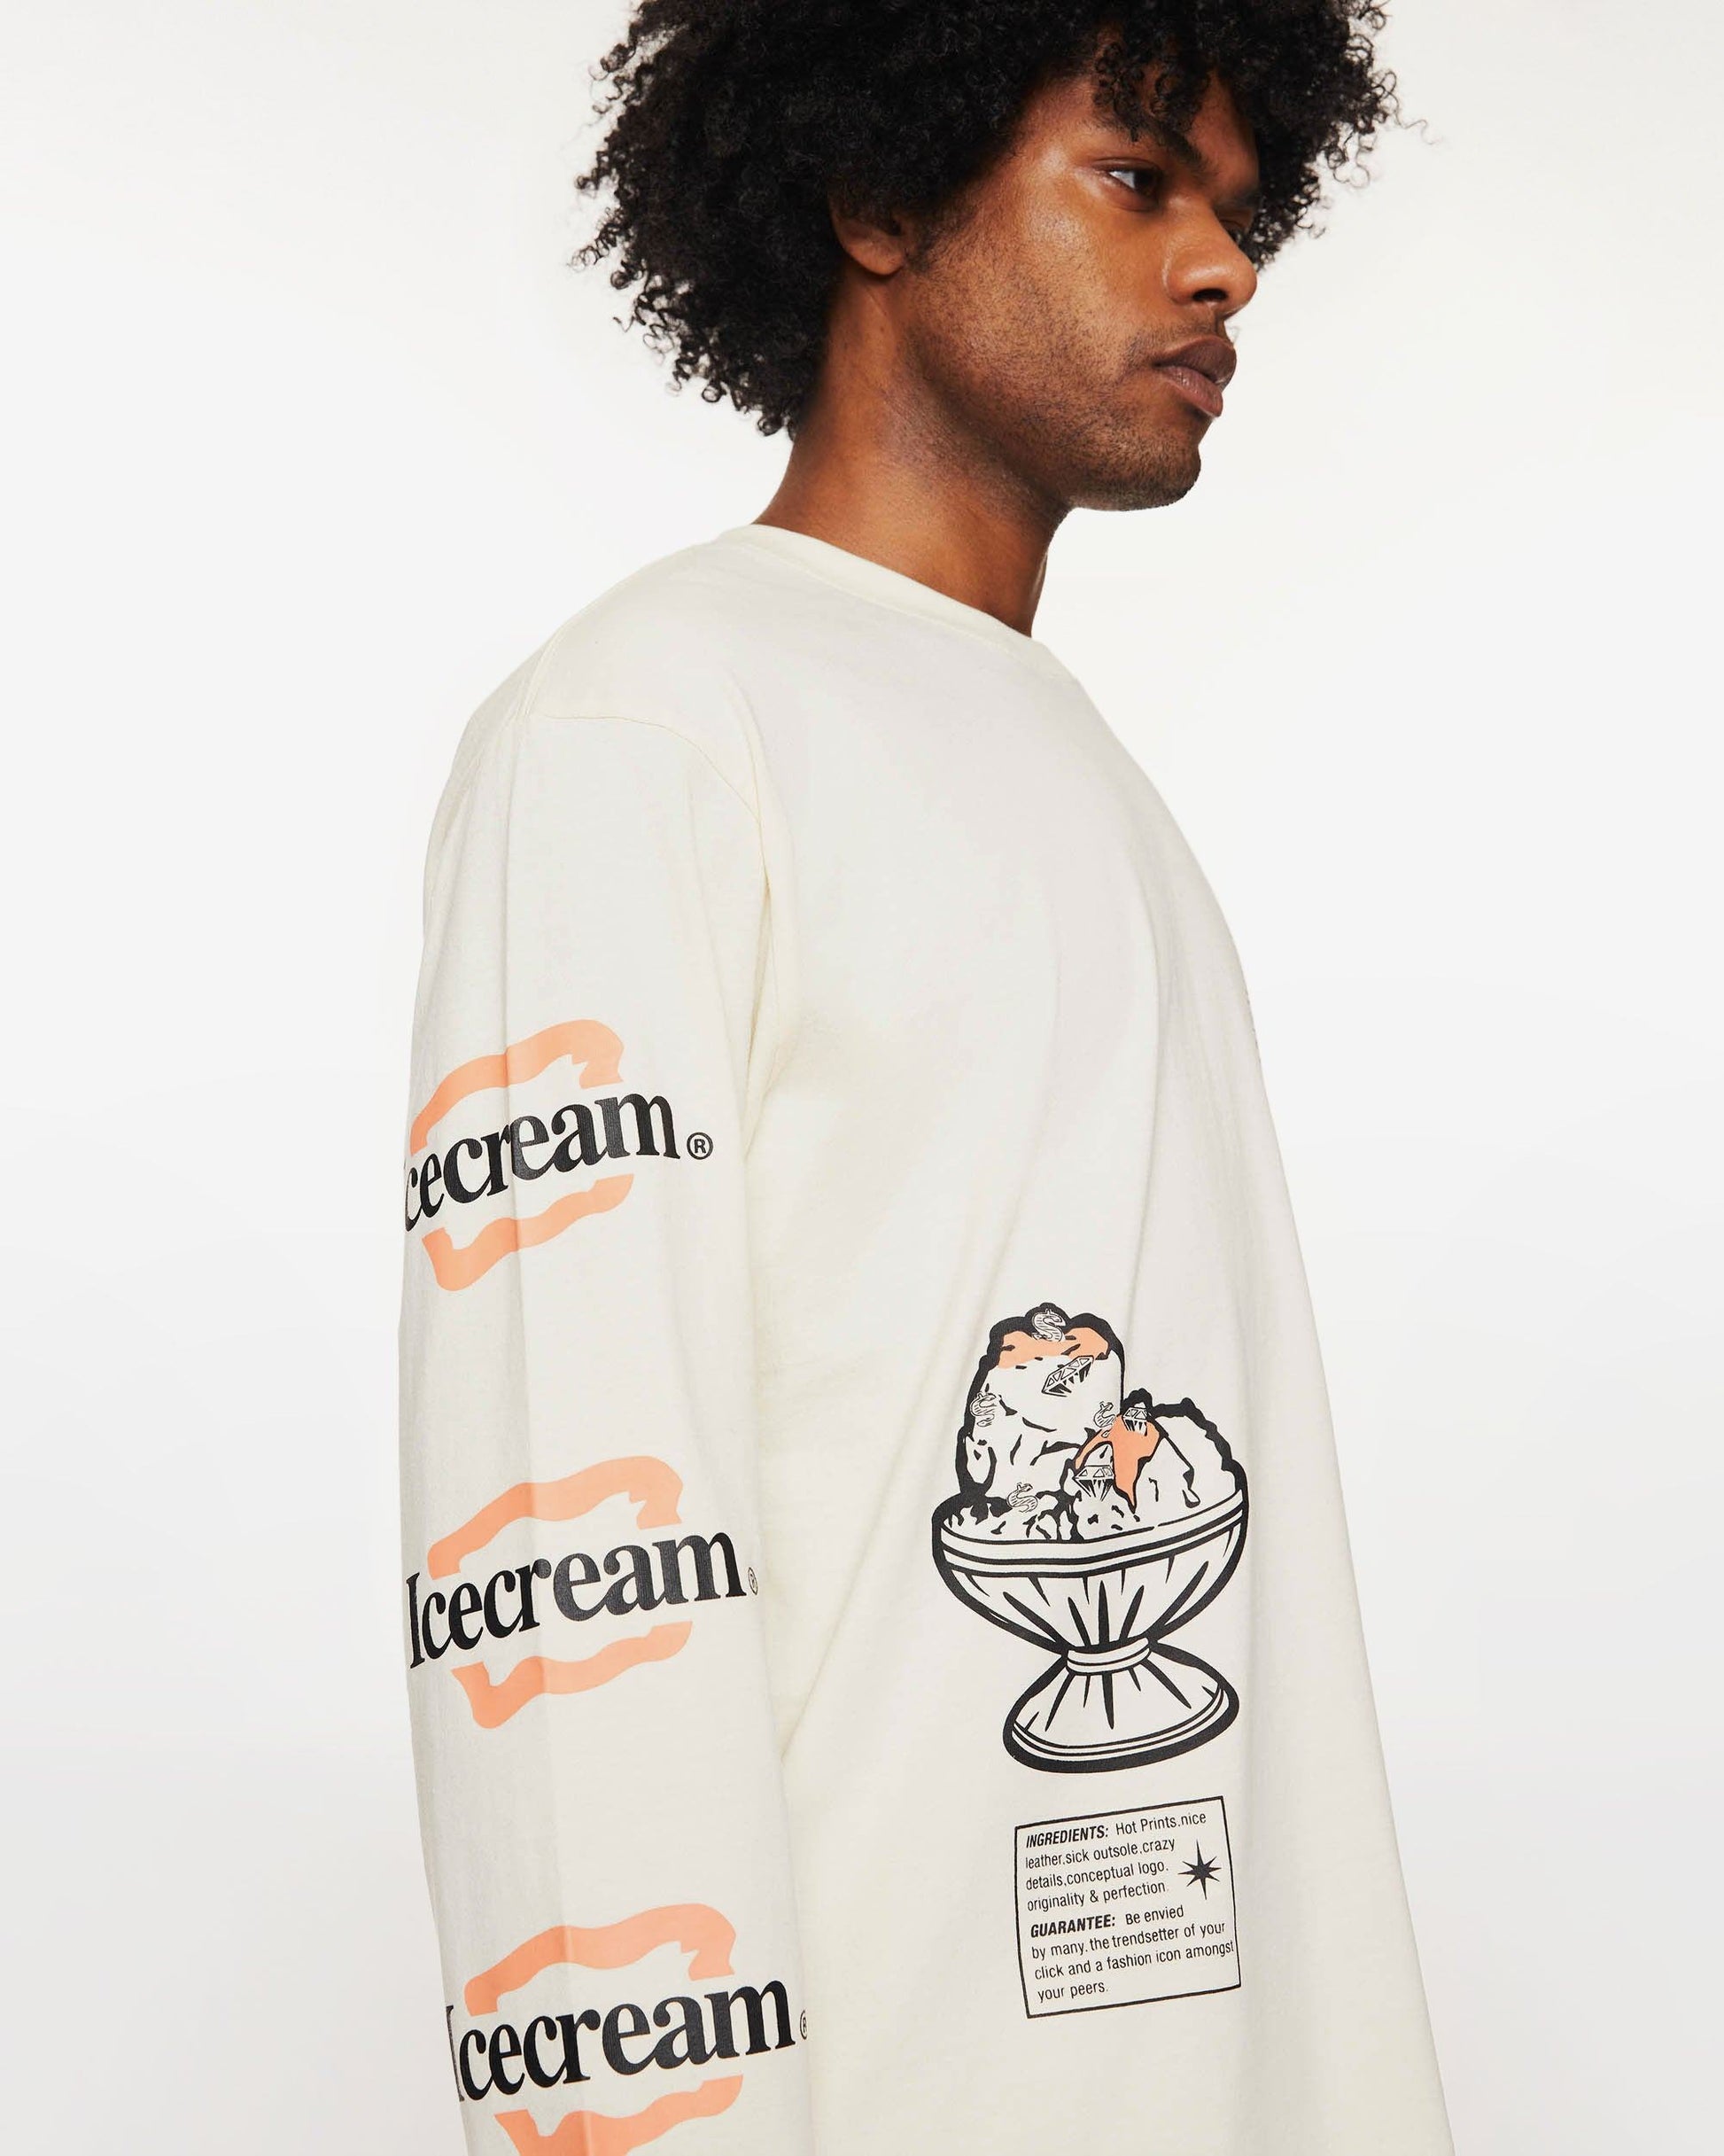 Style Facts L/S Knit - Icecream